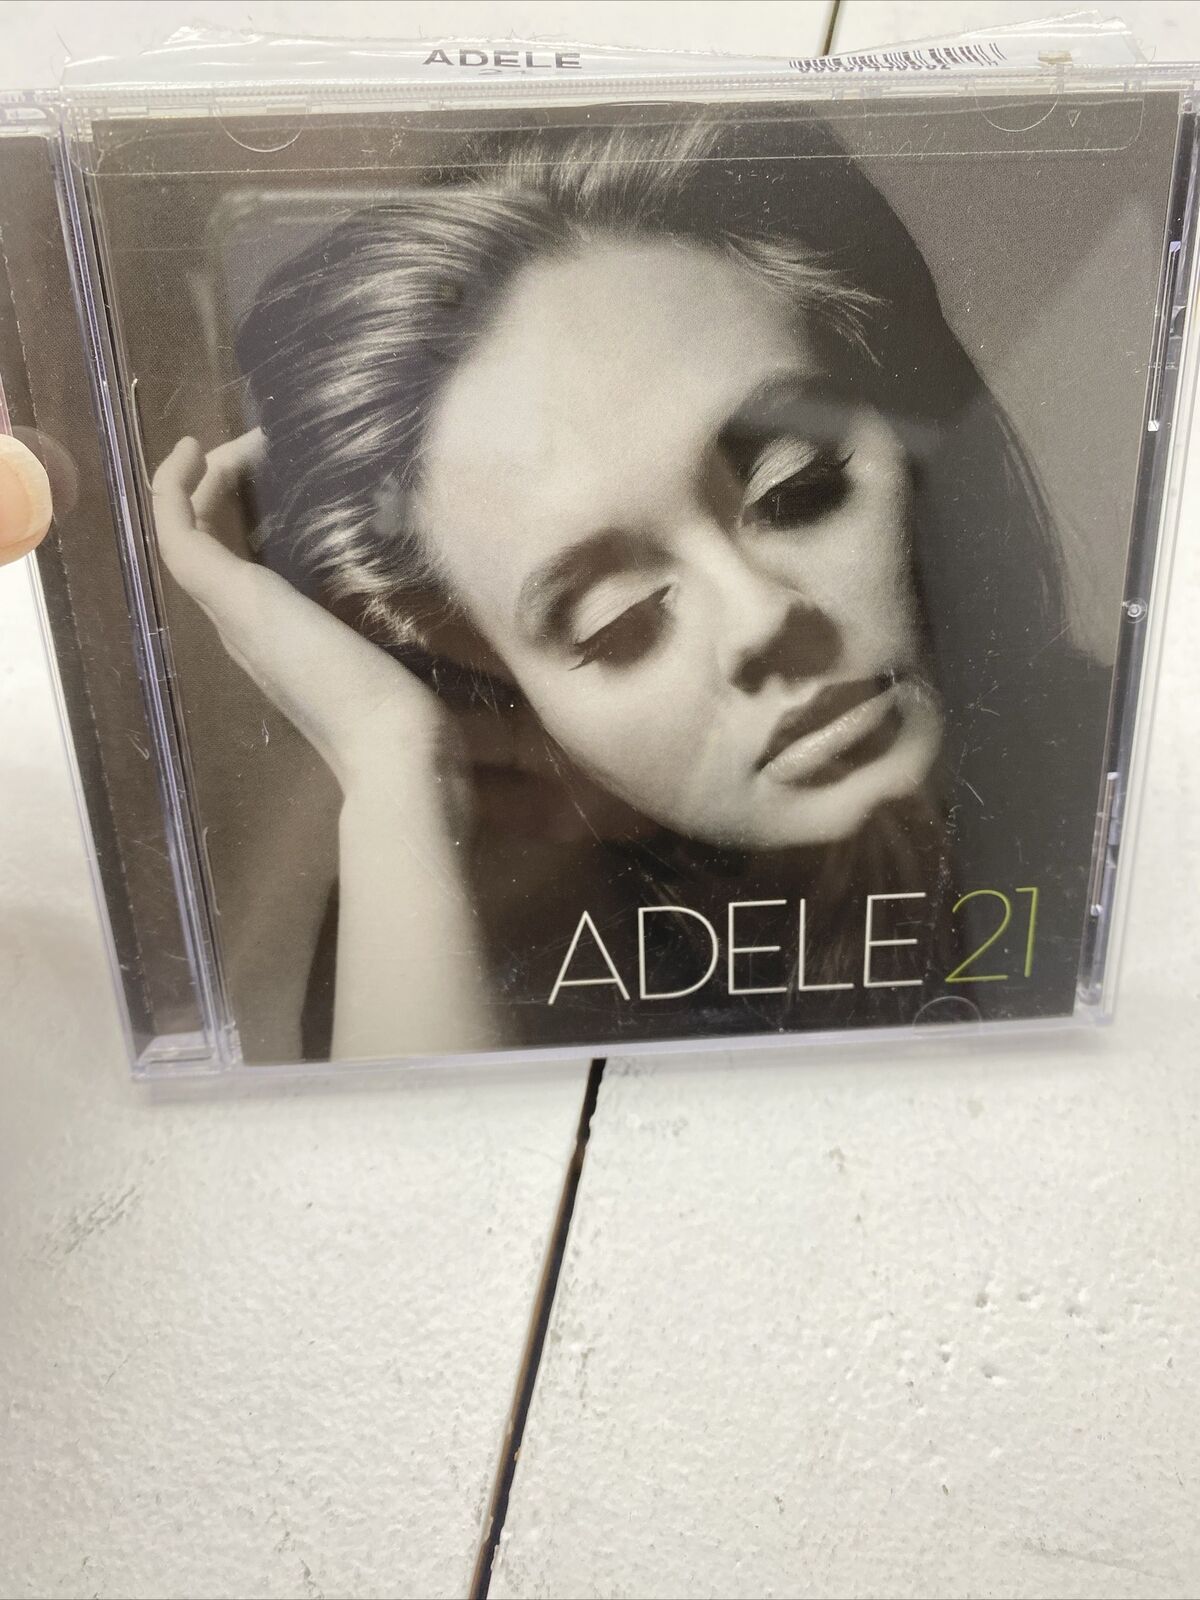 21 by Adele CD - beyond exchange